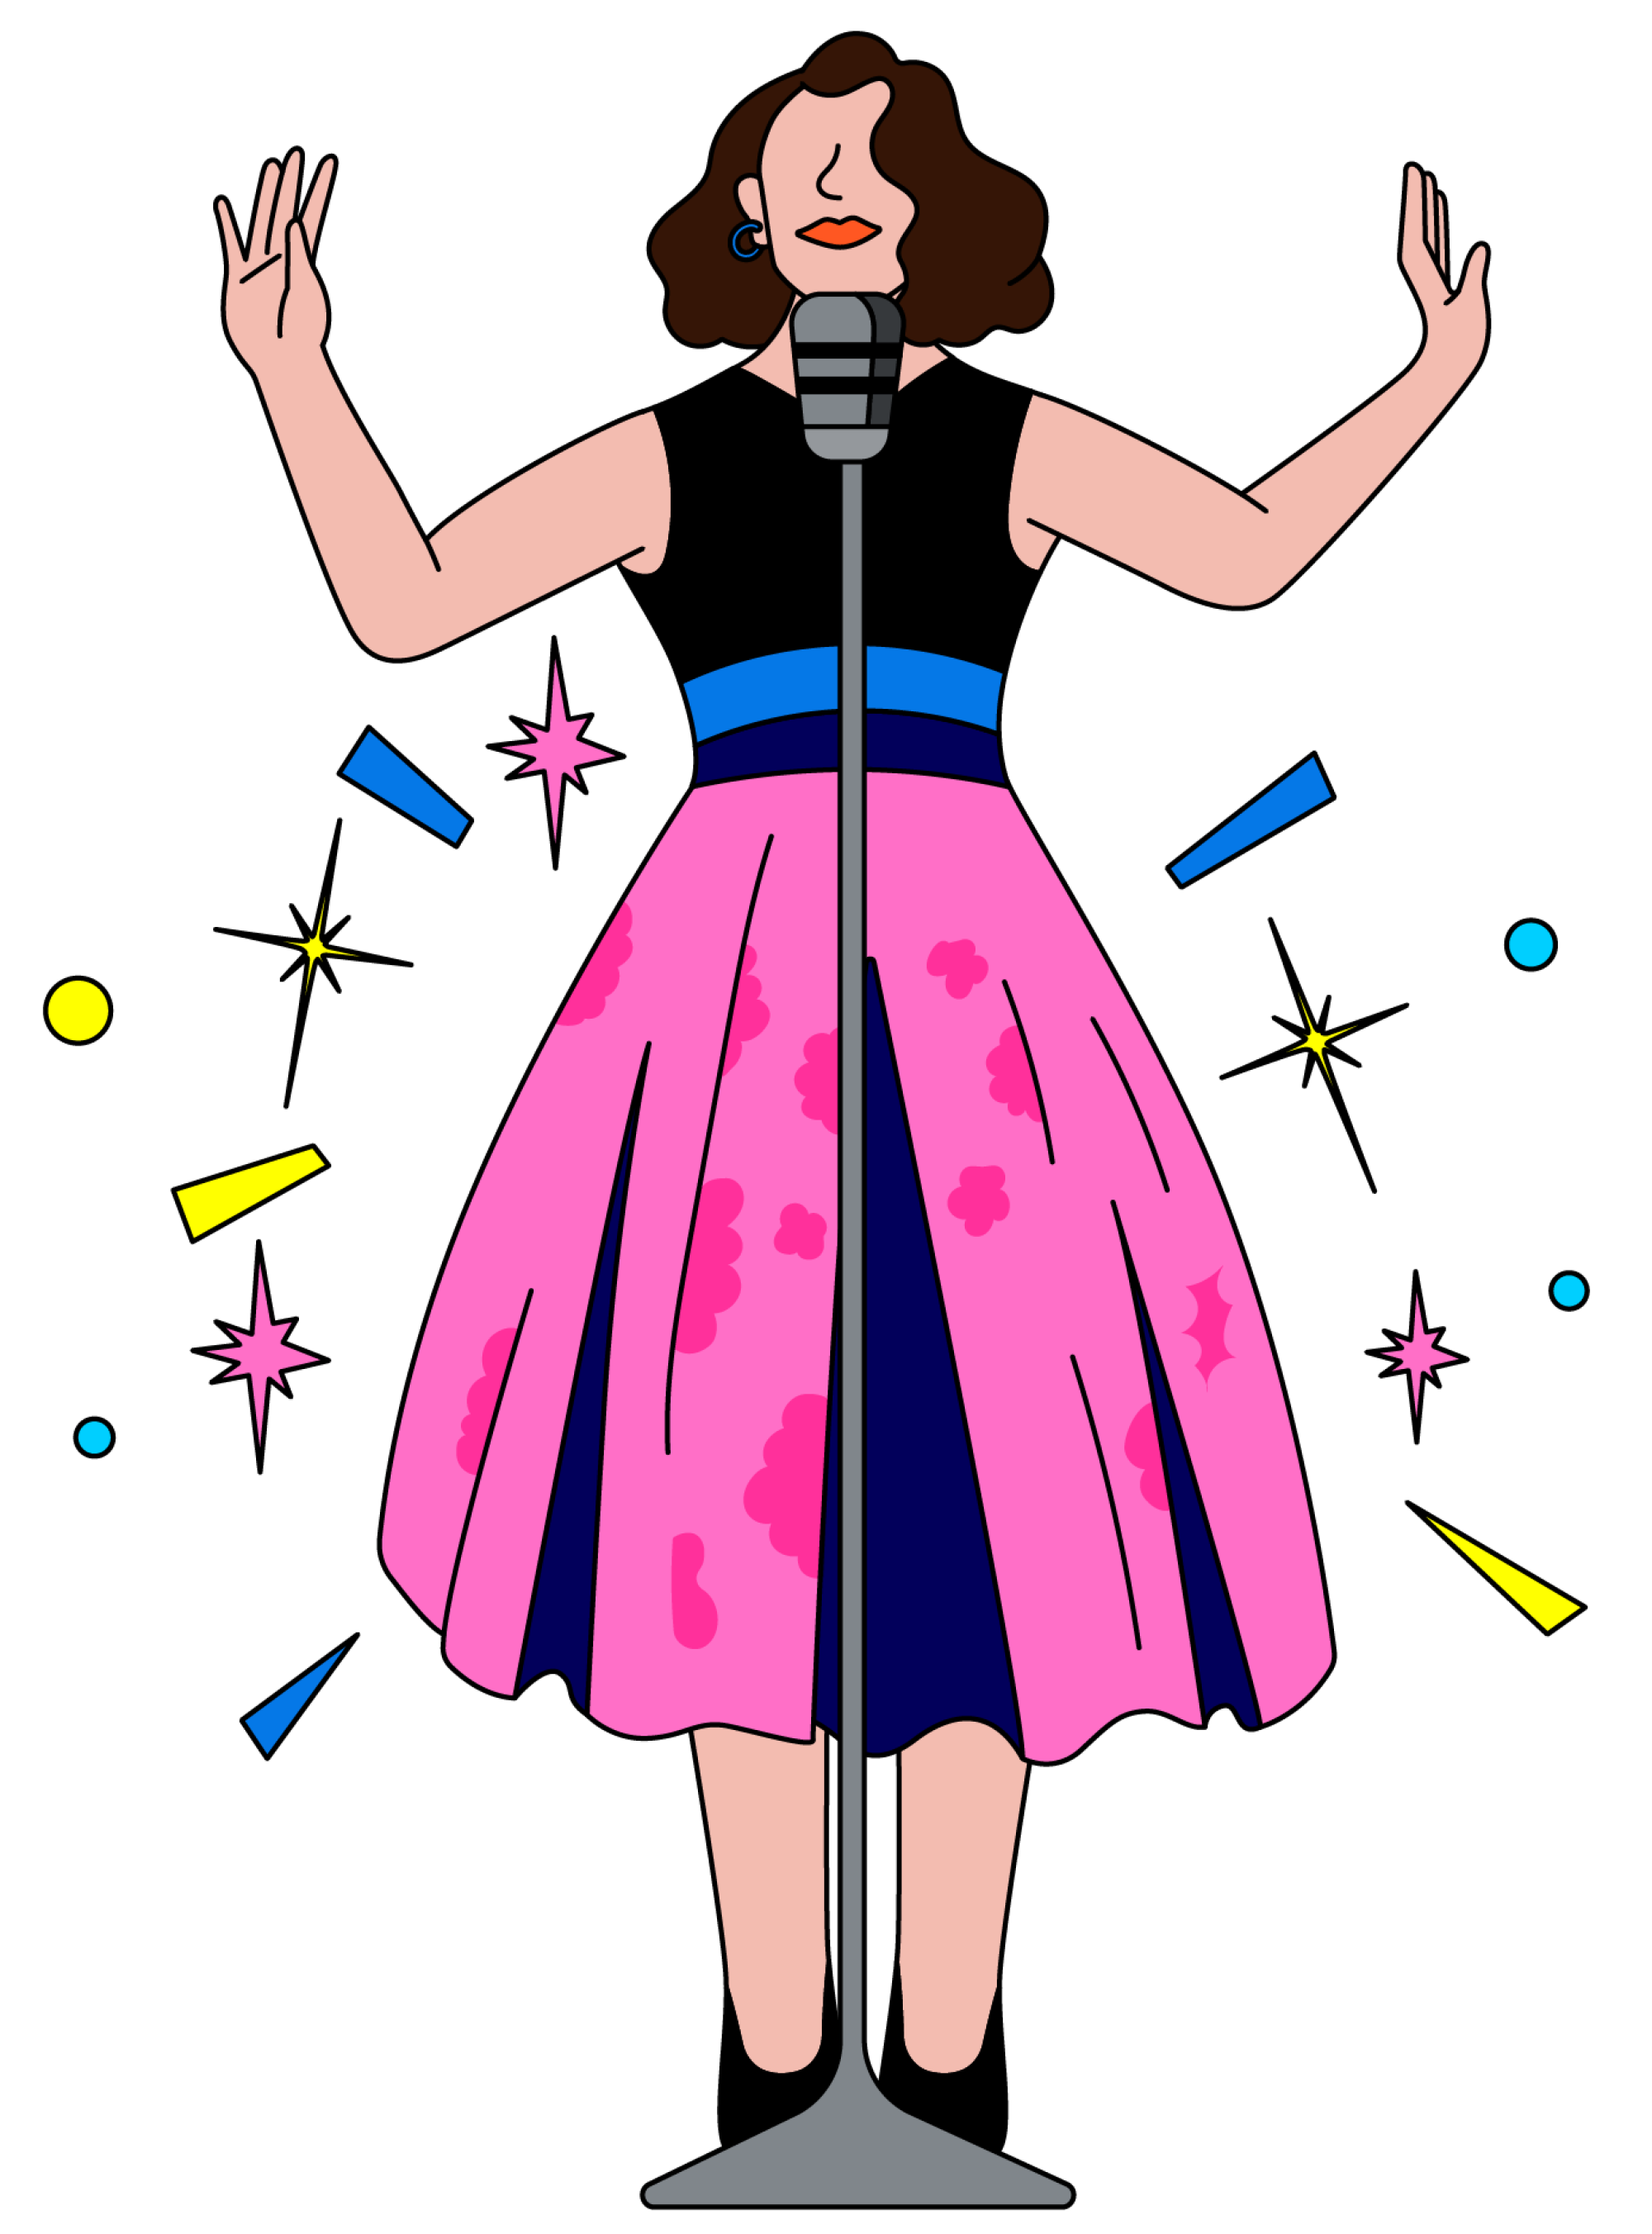 Illustration of Midge from "The Marvelous Mrs Maisel" perfoming on stage